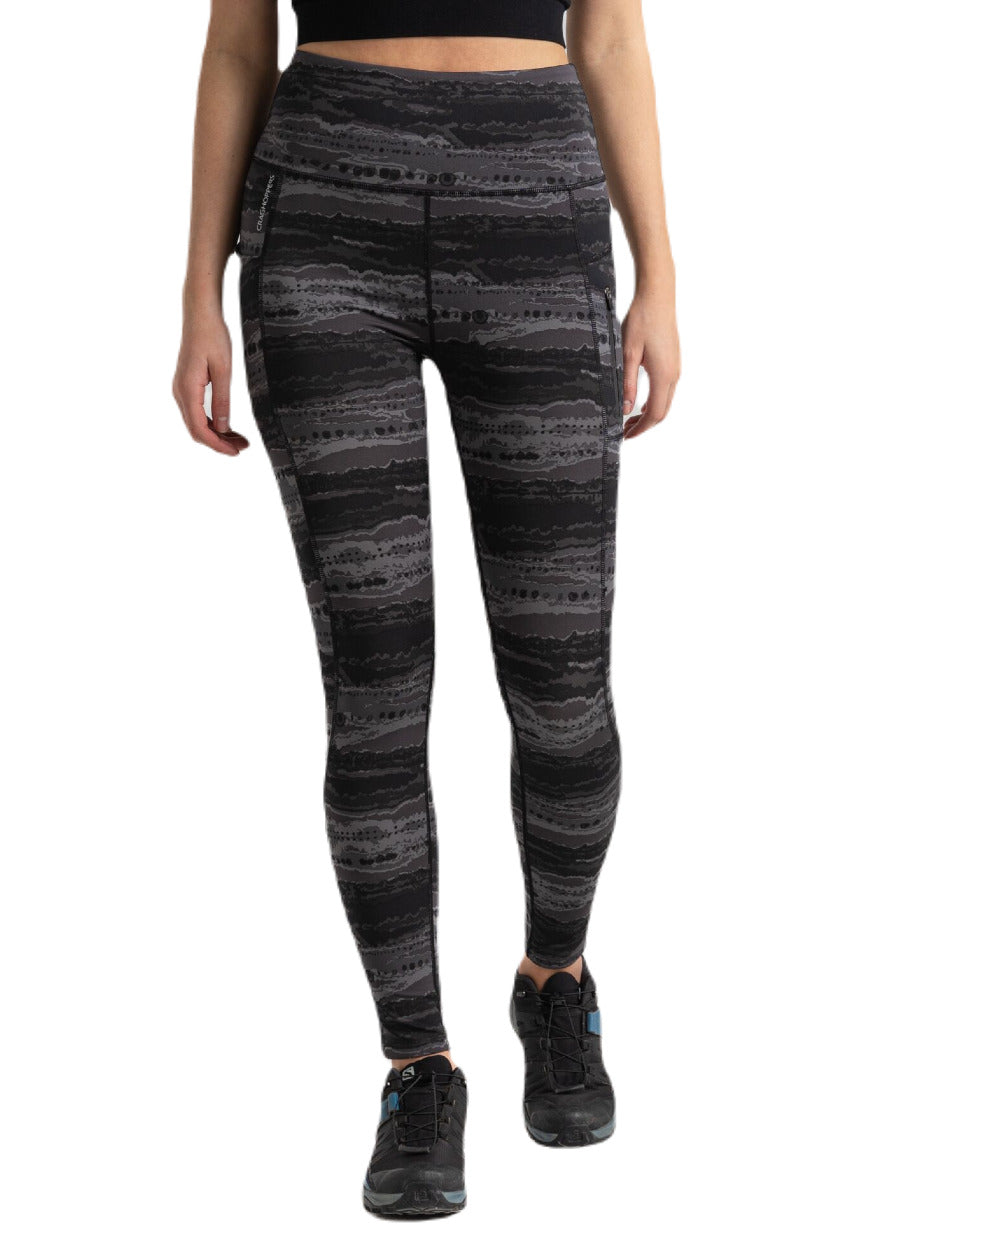 Charcoal Print Coloured Craghoppers Womens Kiwi Pro Leggings On A White Background 